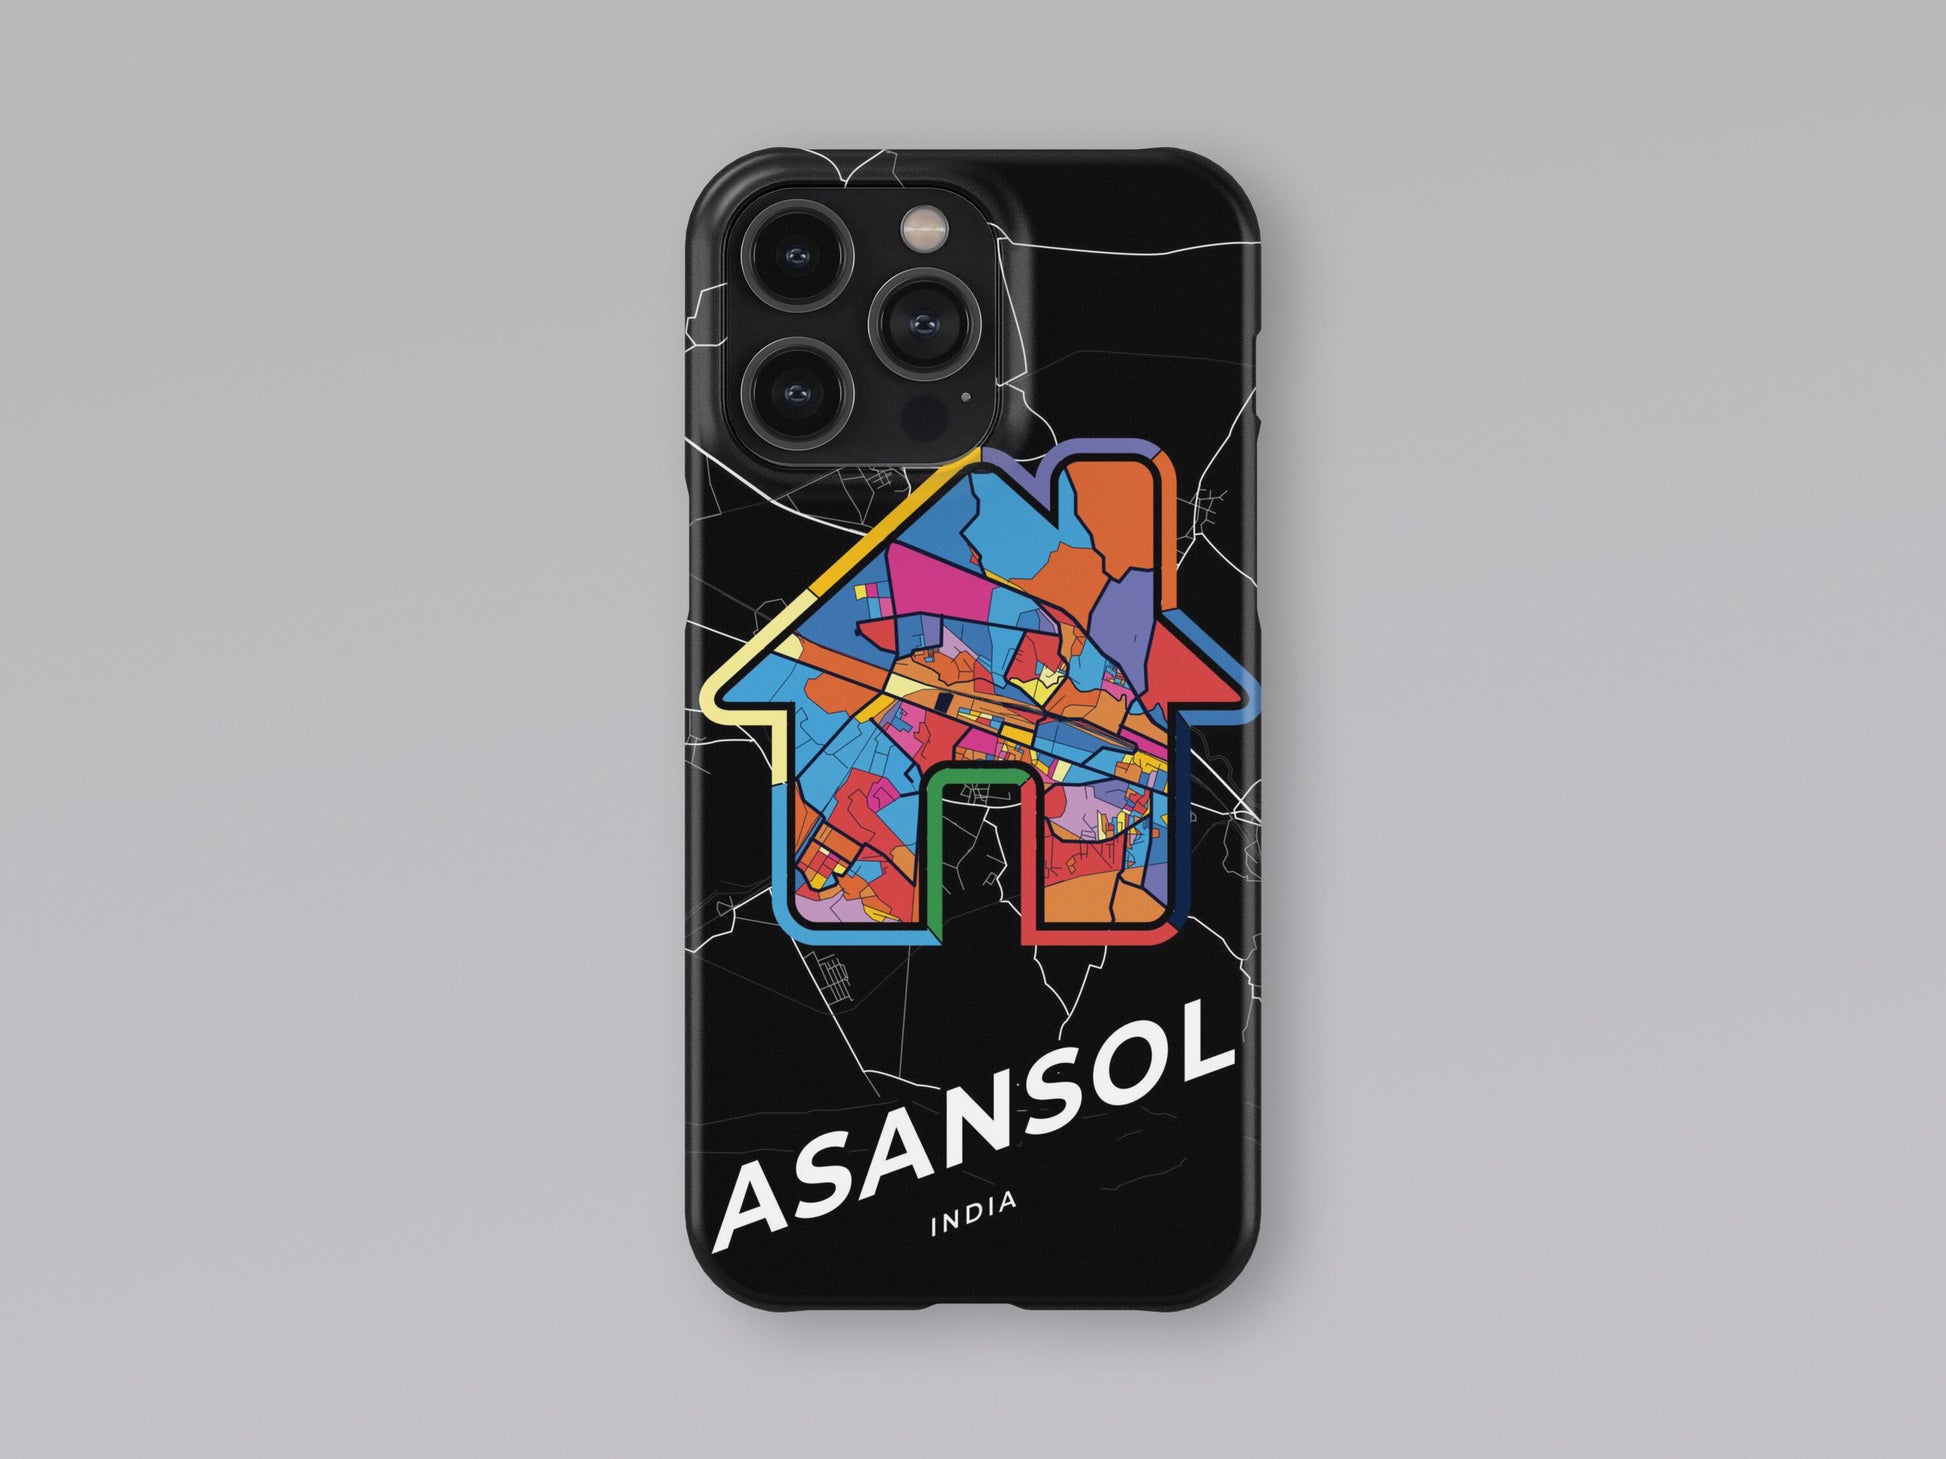 Asansol India slim phone case with colorful icon. Birthday, wedding or housewarming gift. Couple match cases. 3